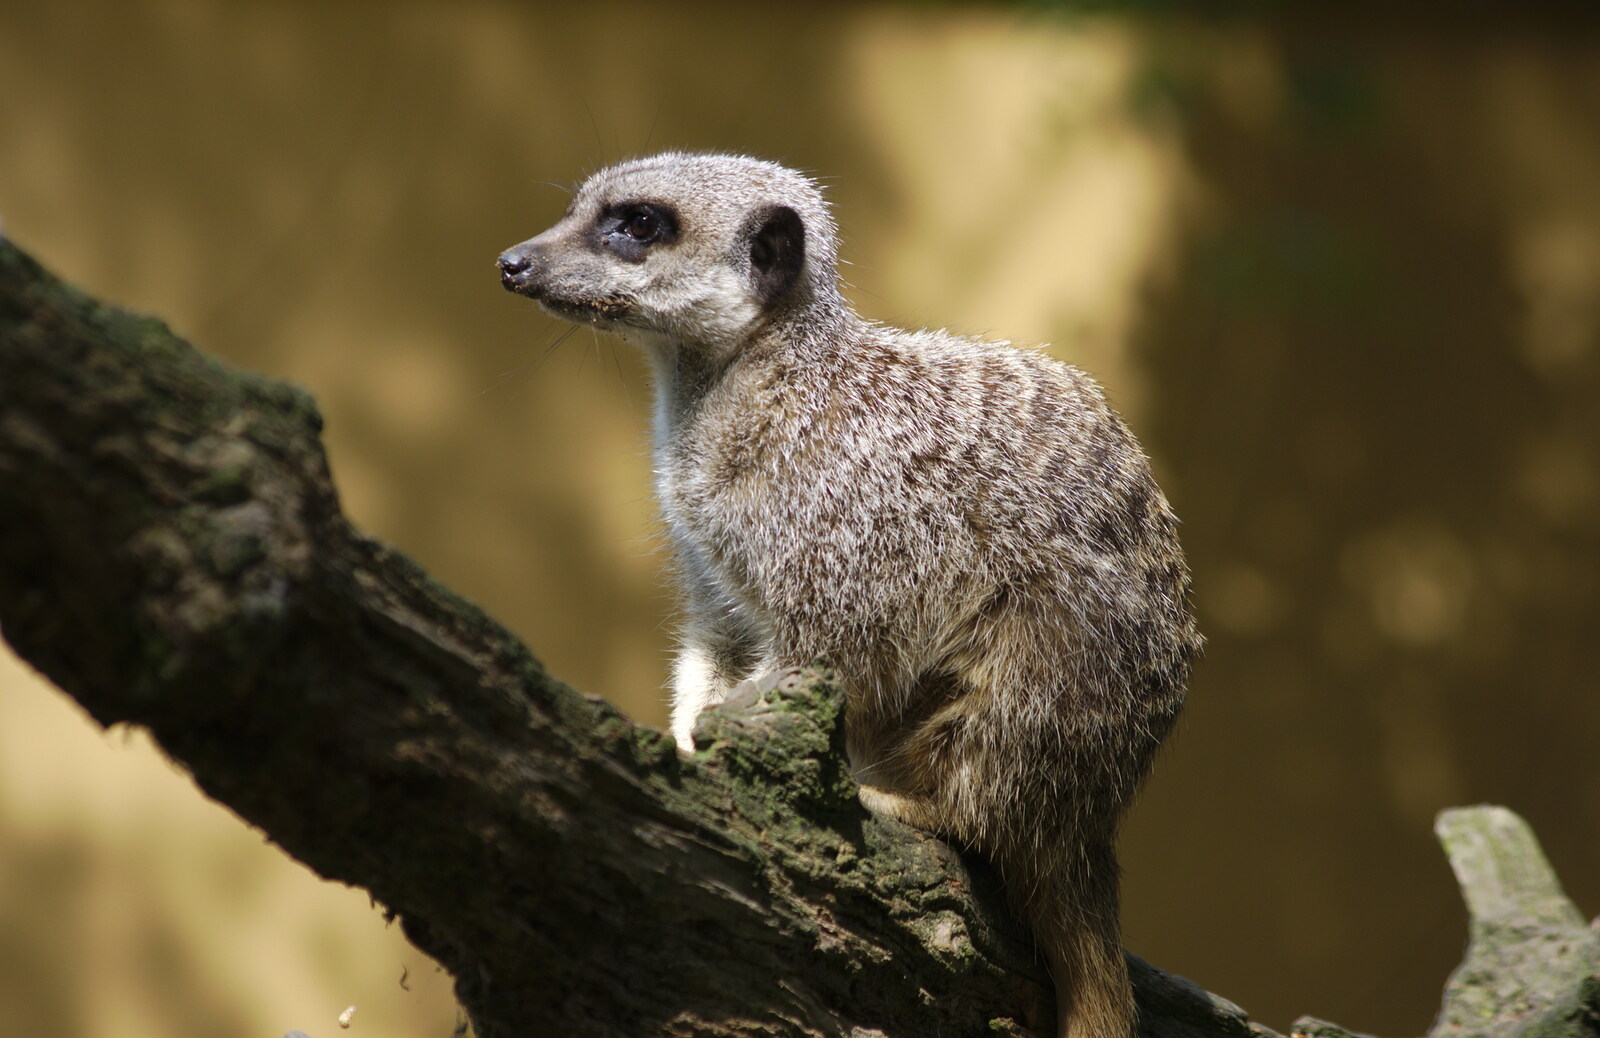 A Birthday Trip to the Zoo, Banham, Norfolk - 26th May 2014: A meerkat on a tree